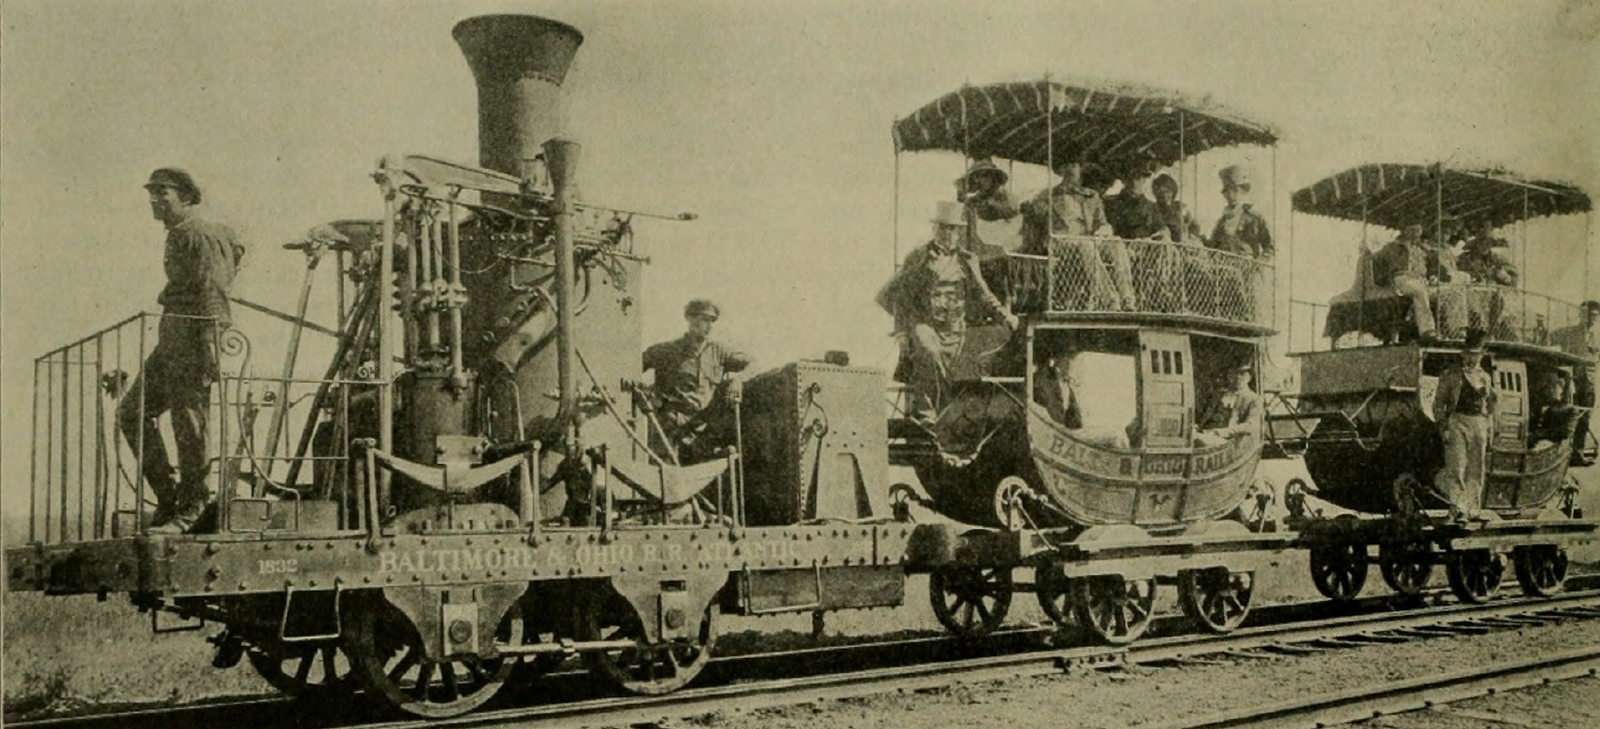 Replica at the “Fair of the Iron Horse” in 1927